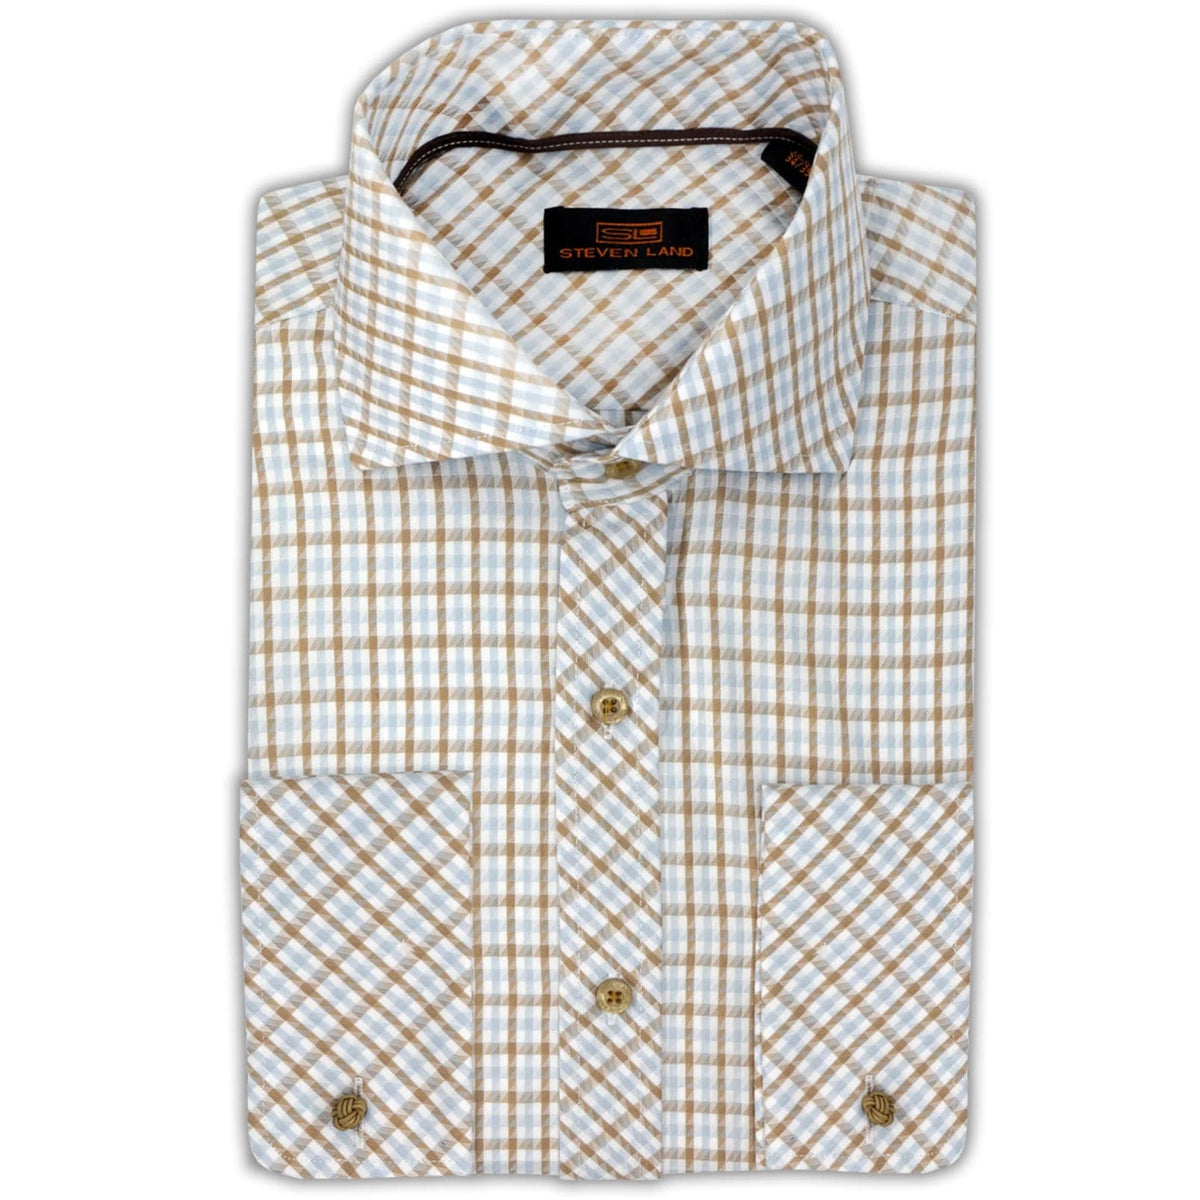 LND NECKWEAR INC. S C teven Land Dress Shirt | Trim and Classic Fit | Arlo 100% Cotton | Color Green/Ds2327